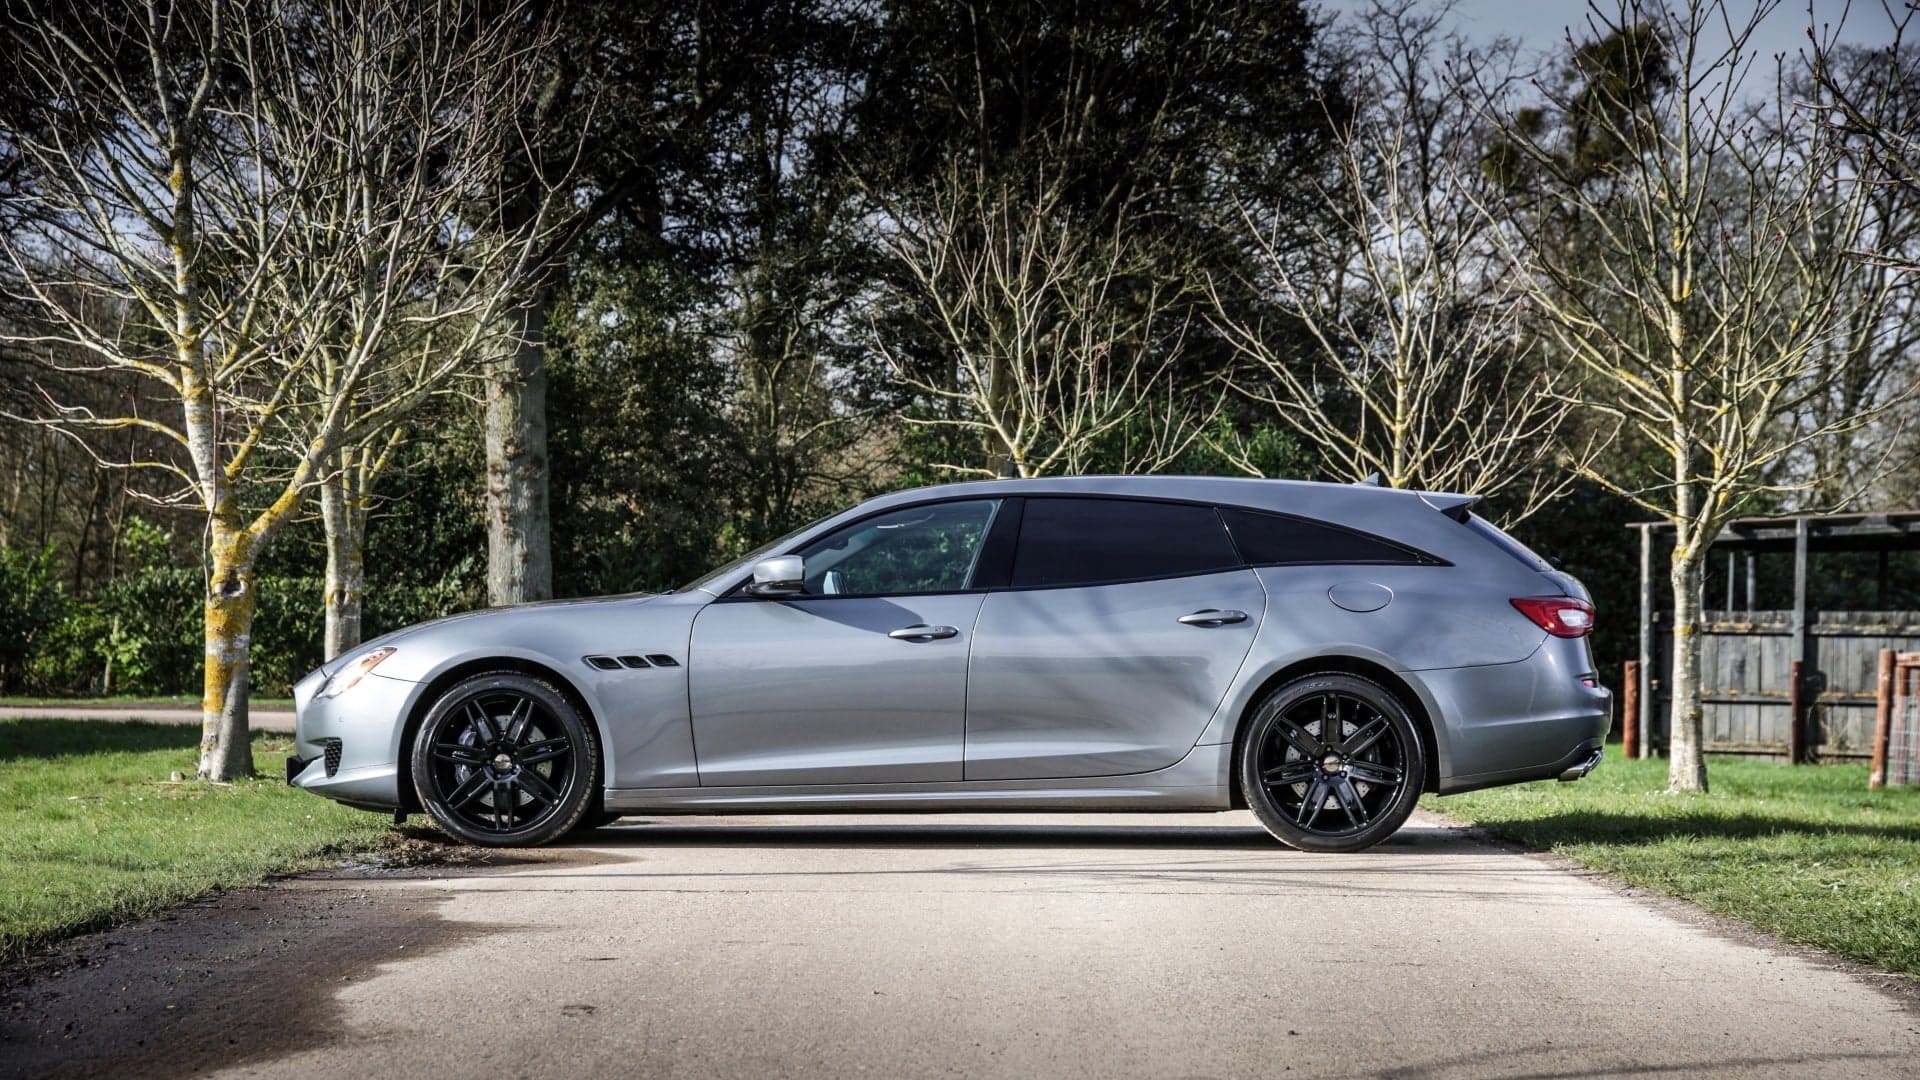 This One-Off Diesel Maserati ‘Cinqueporte’ Wagon Is Full of Questionable Decisions